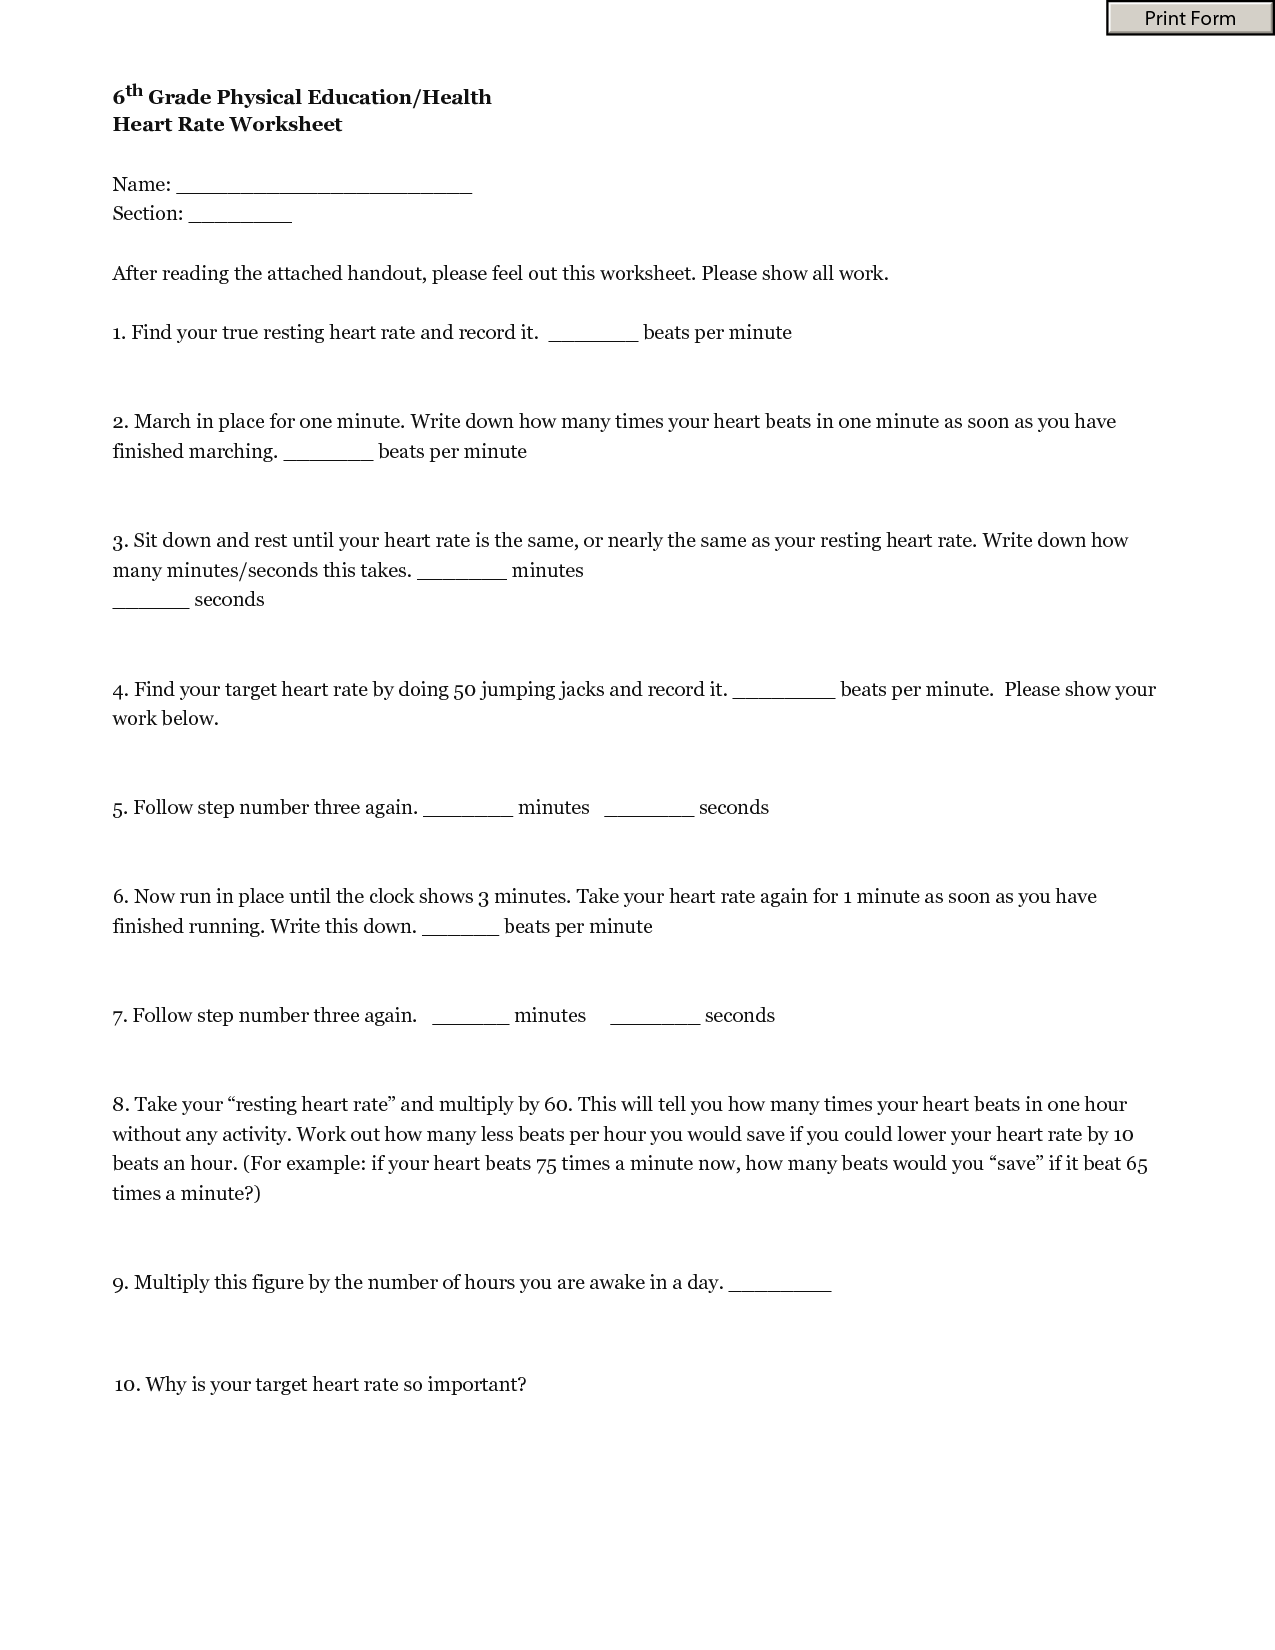 6th Grade Physical Education Worksheets Image